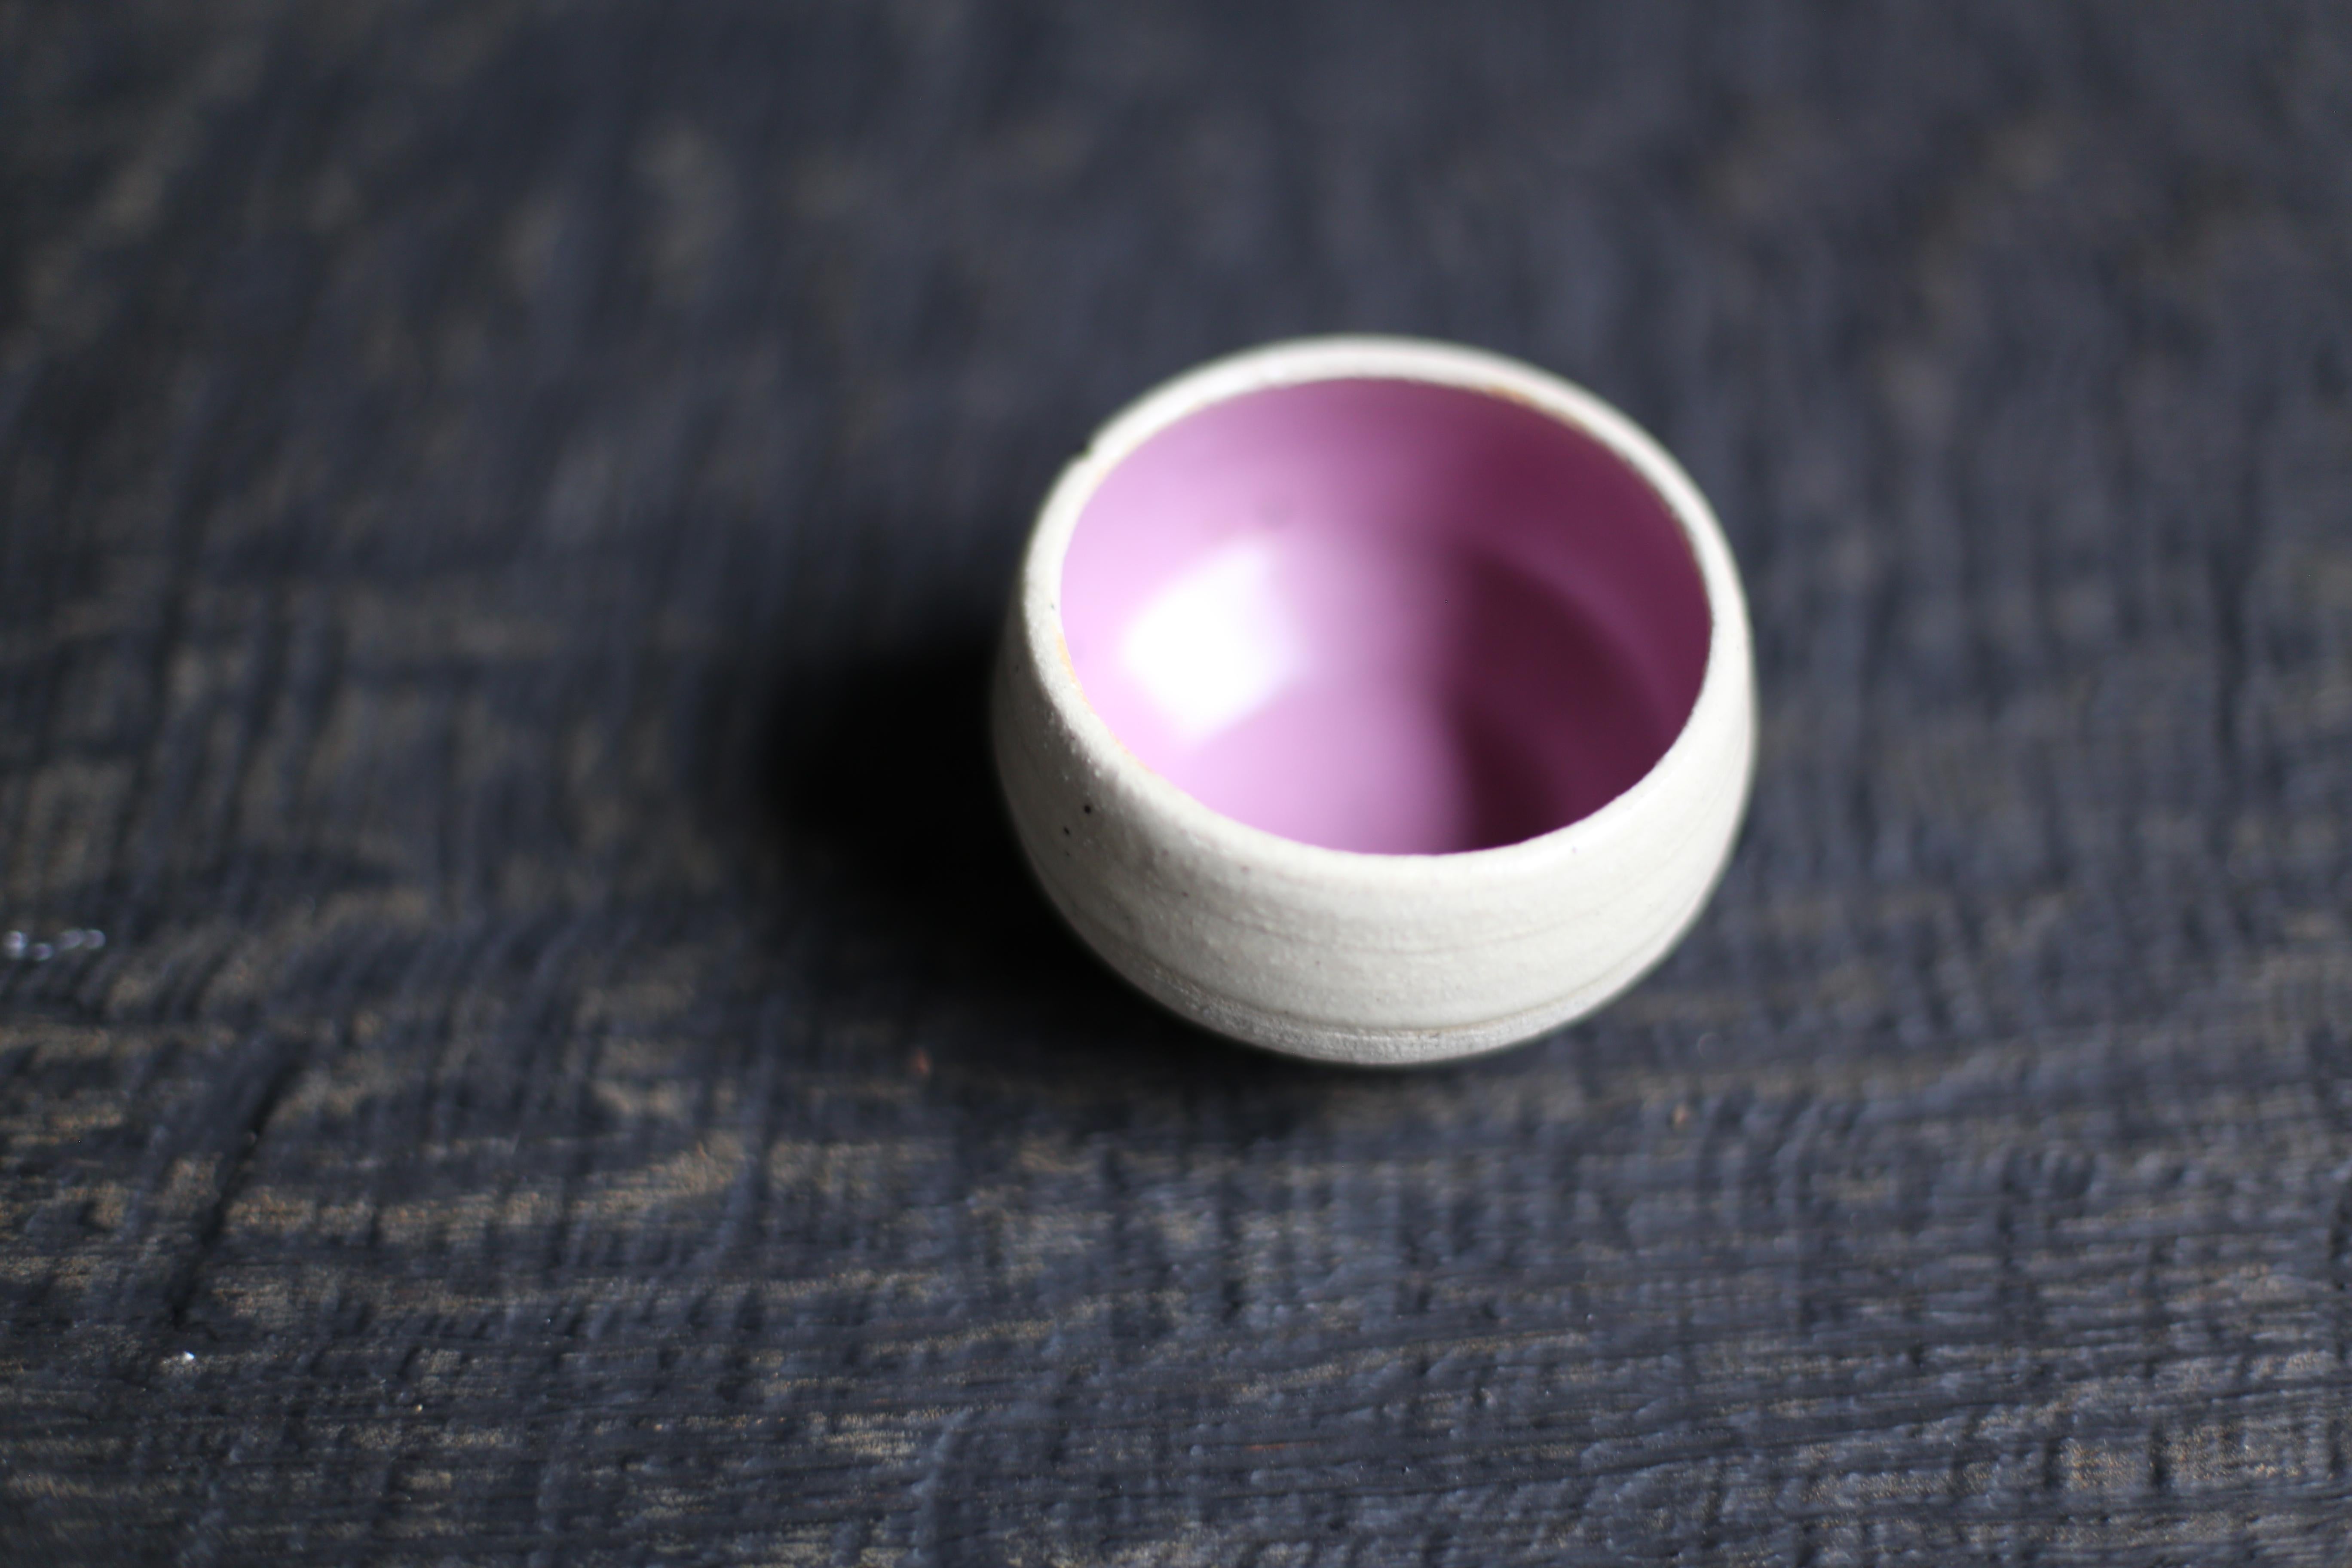 Cup in white clay with satin mauve + sheer glaze
2022s / Belgium
Size : f80 h50 mm
Artist : Sigrid Volders


[Sigrid Volders]
Based in Antwerp, Belgium, she works vigorously as a ceramic artist, mainly as a hair-making artist active in media